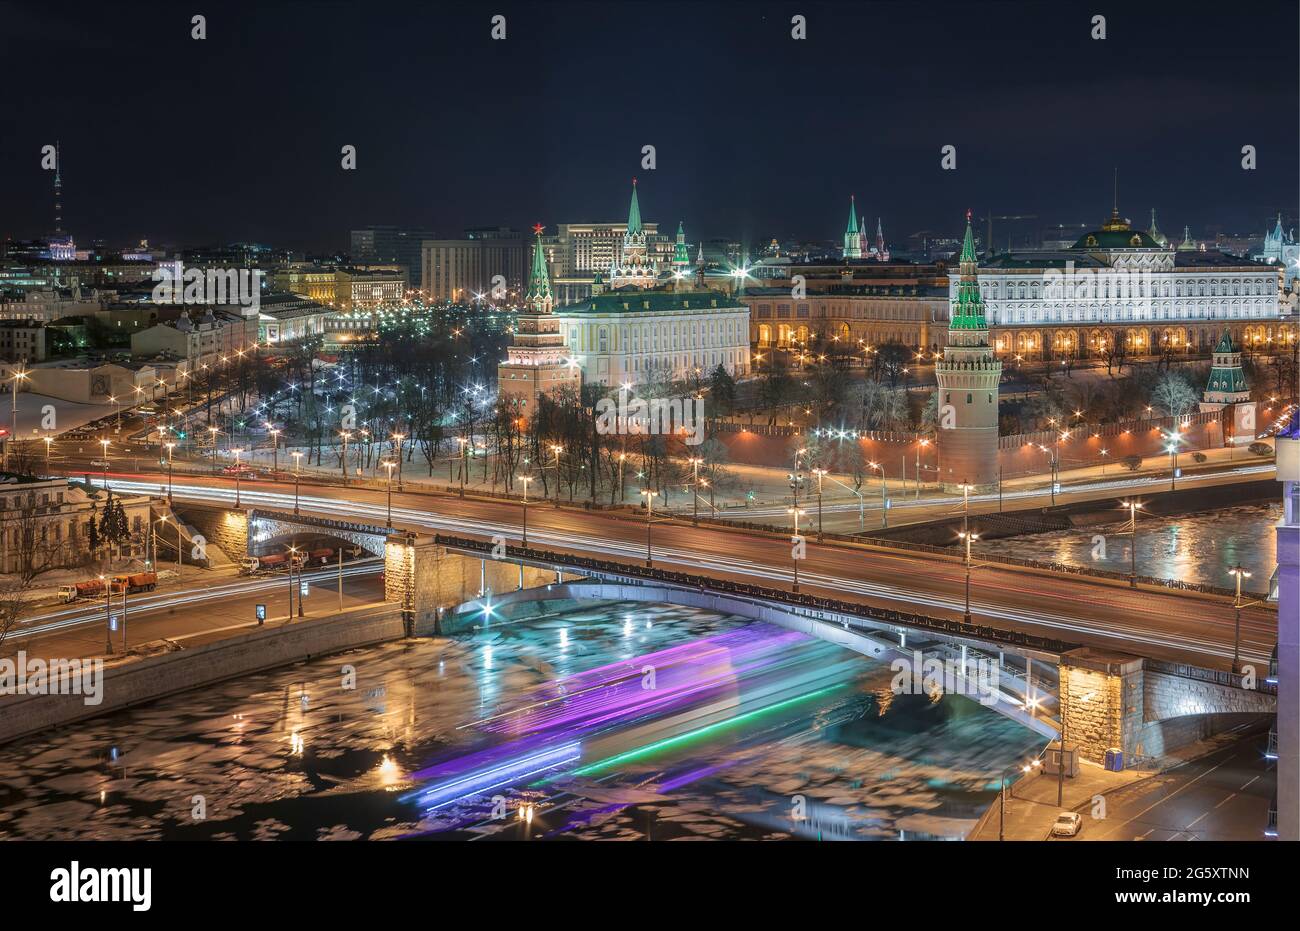 Freezelight from a passing ship under the bridge opposite the Moscow Kremlin. Aerial view of popular landmark Kremlin at Night Stock Photo